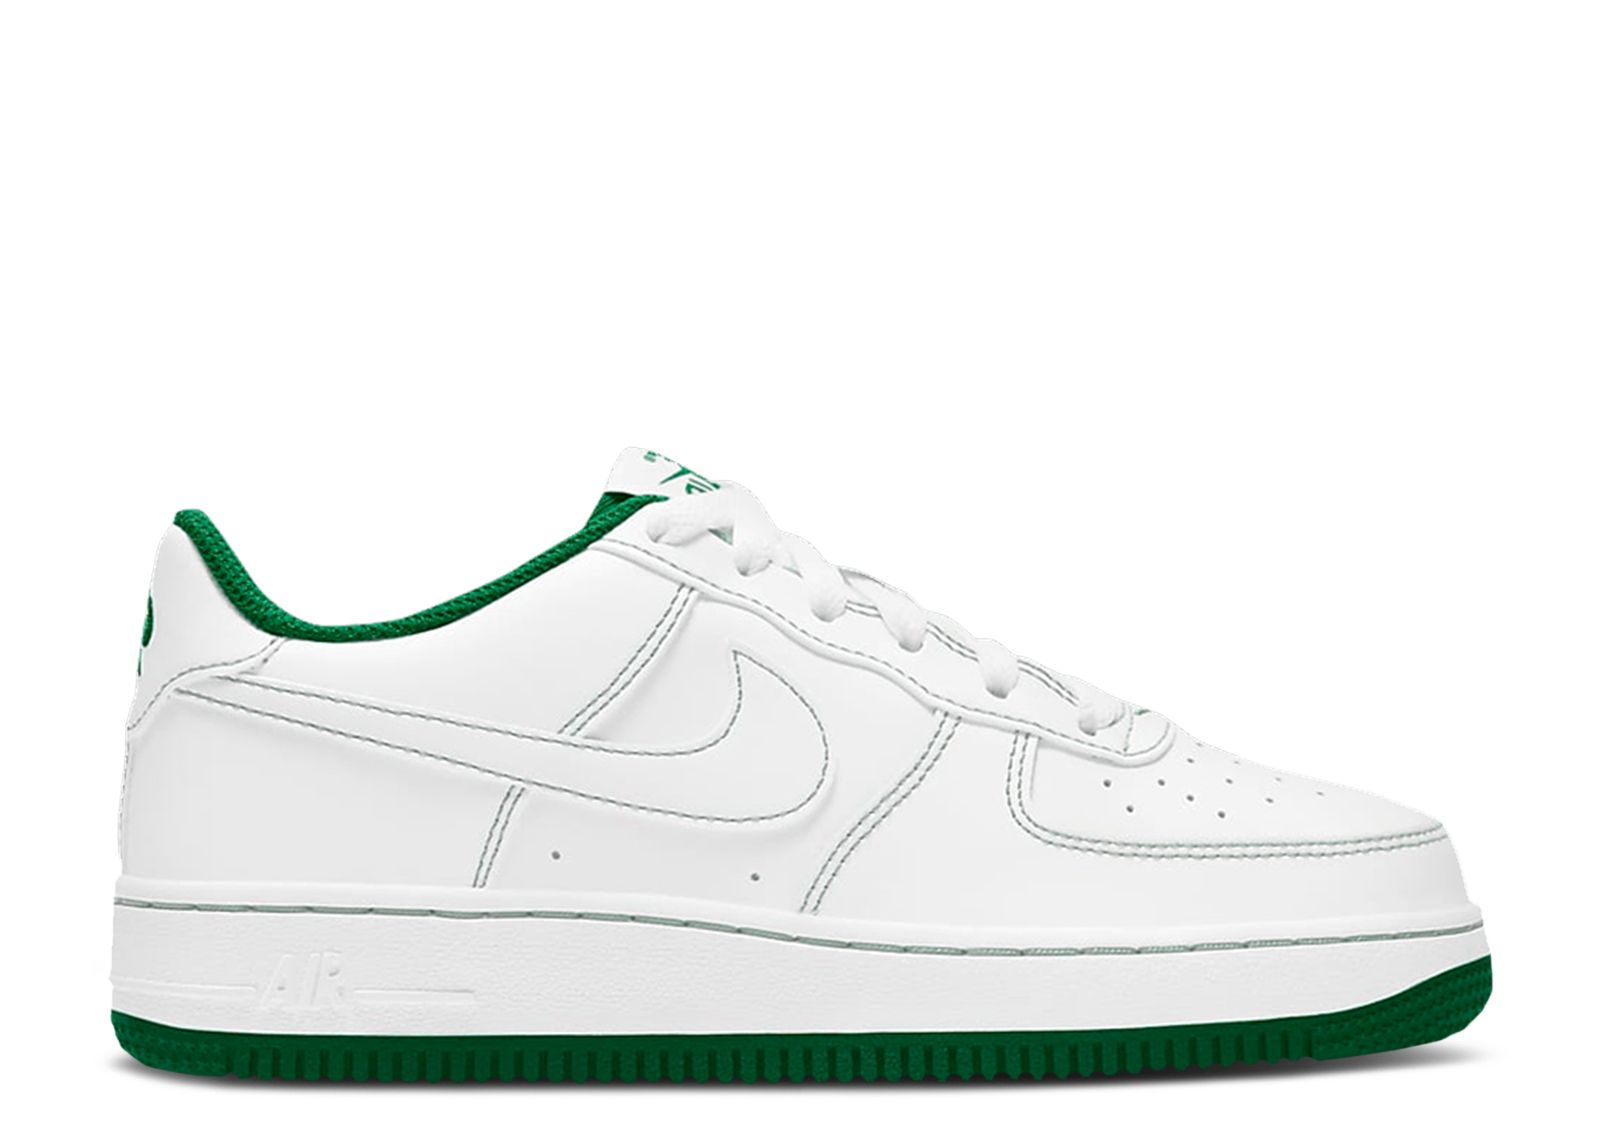 Second Chance - Nike Air Force 1 Low White Pine Green (GS) - 37,5 | NEW